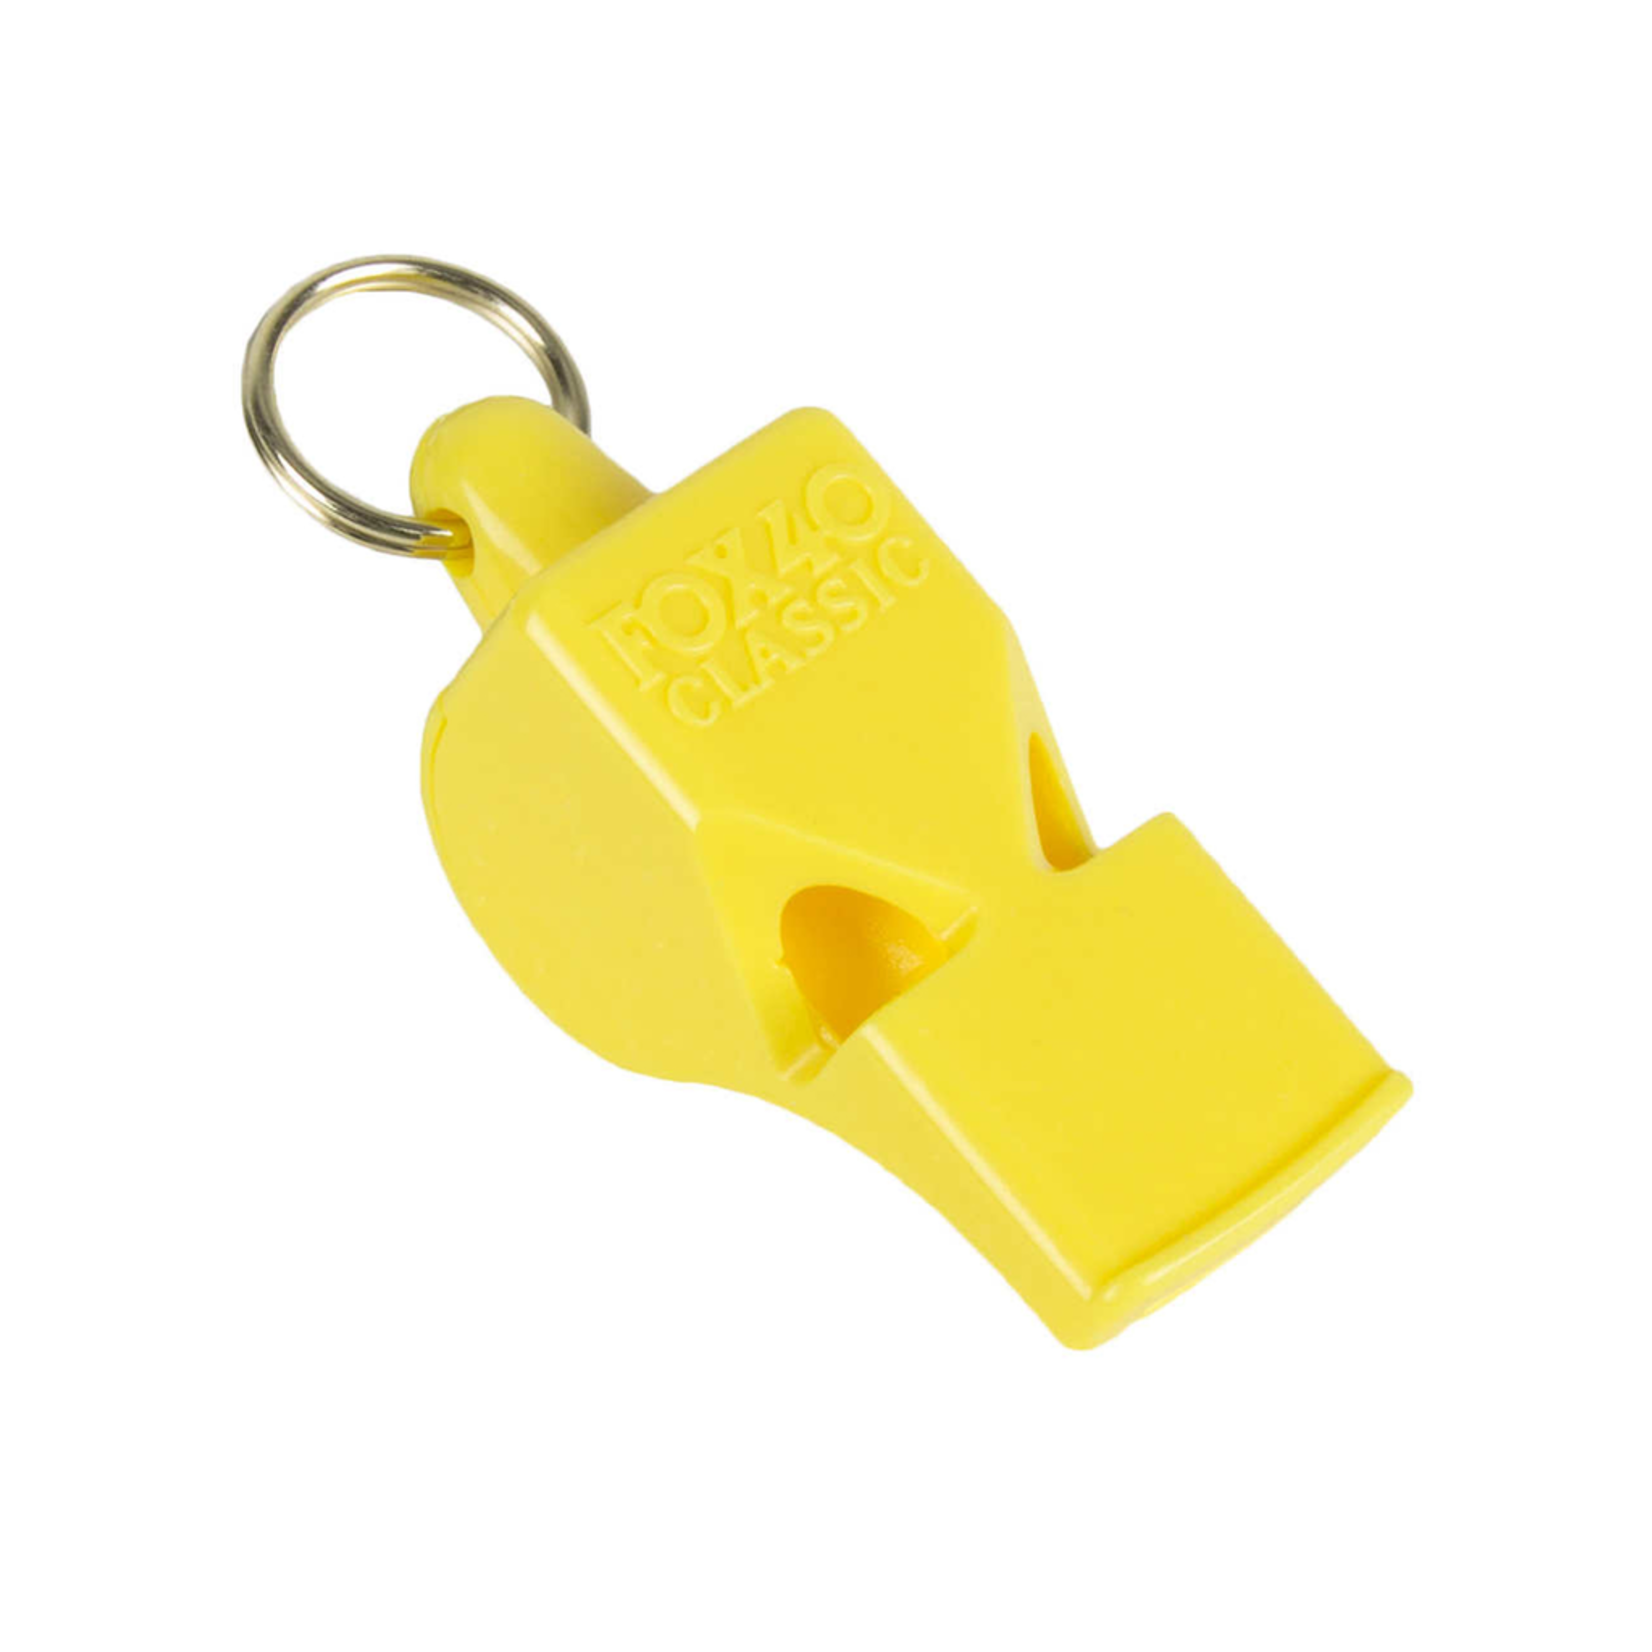 NRS Fox 40 Classic Whistle